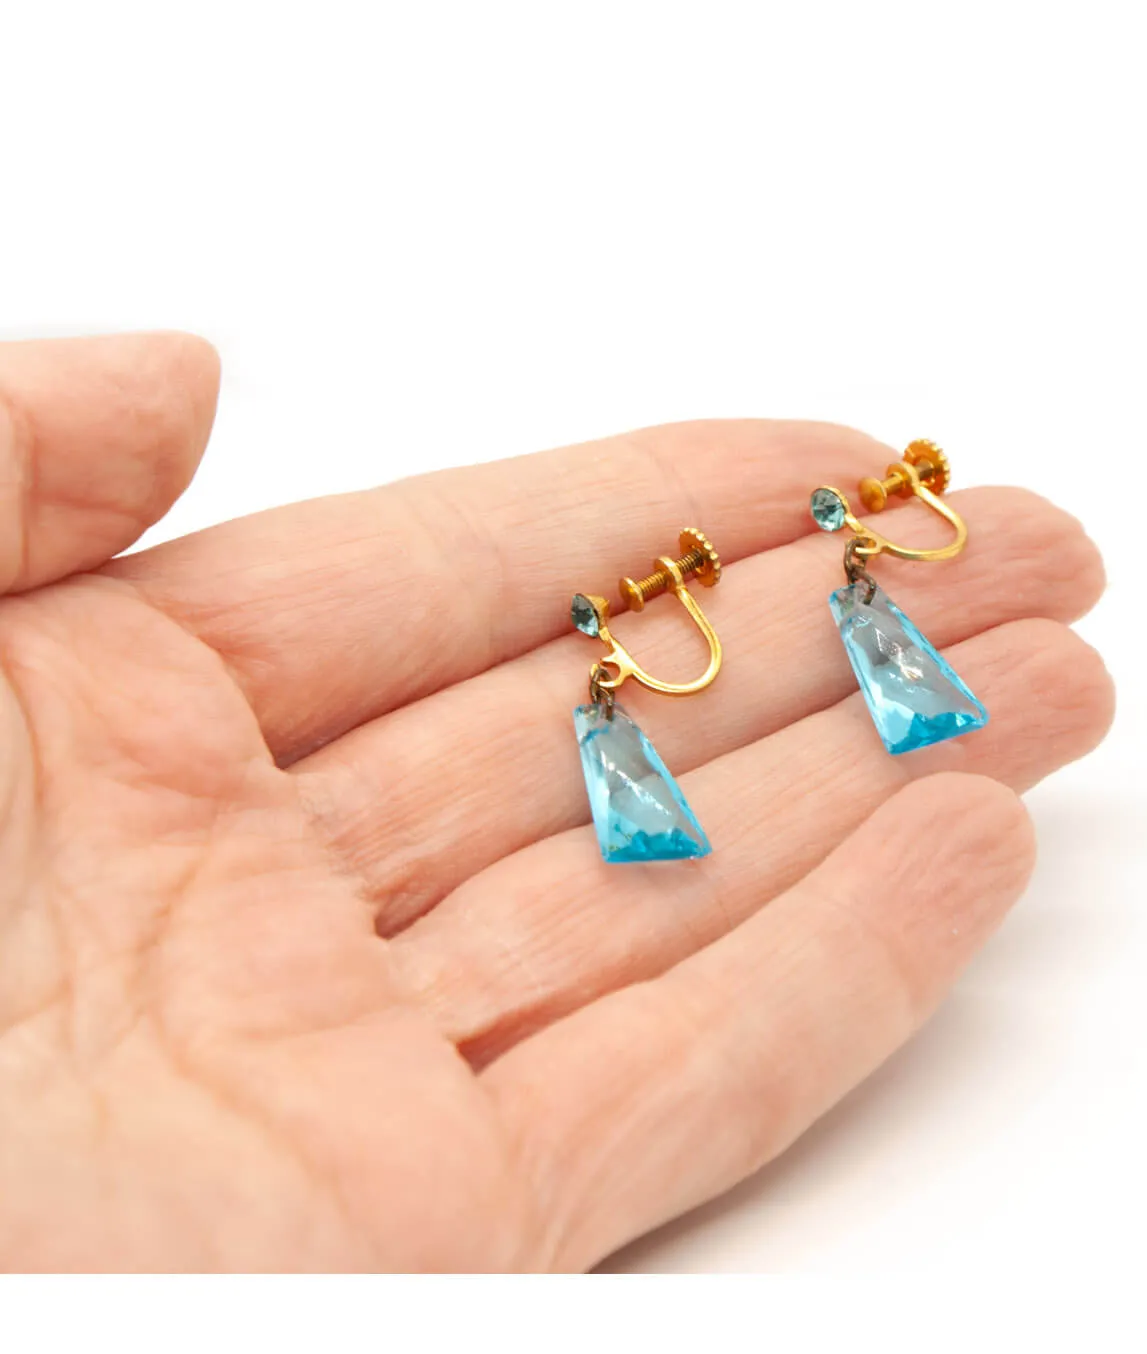 Vintage blue glass earrings in the hand